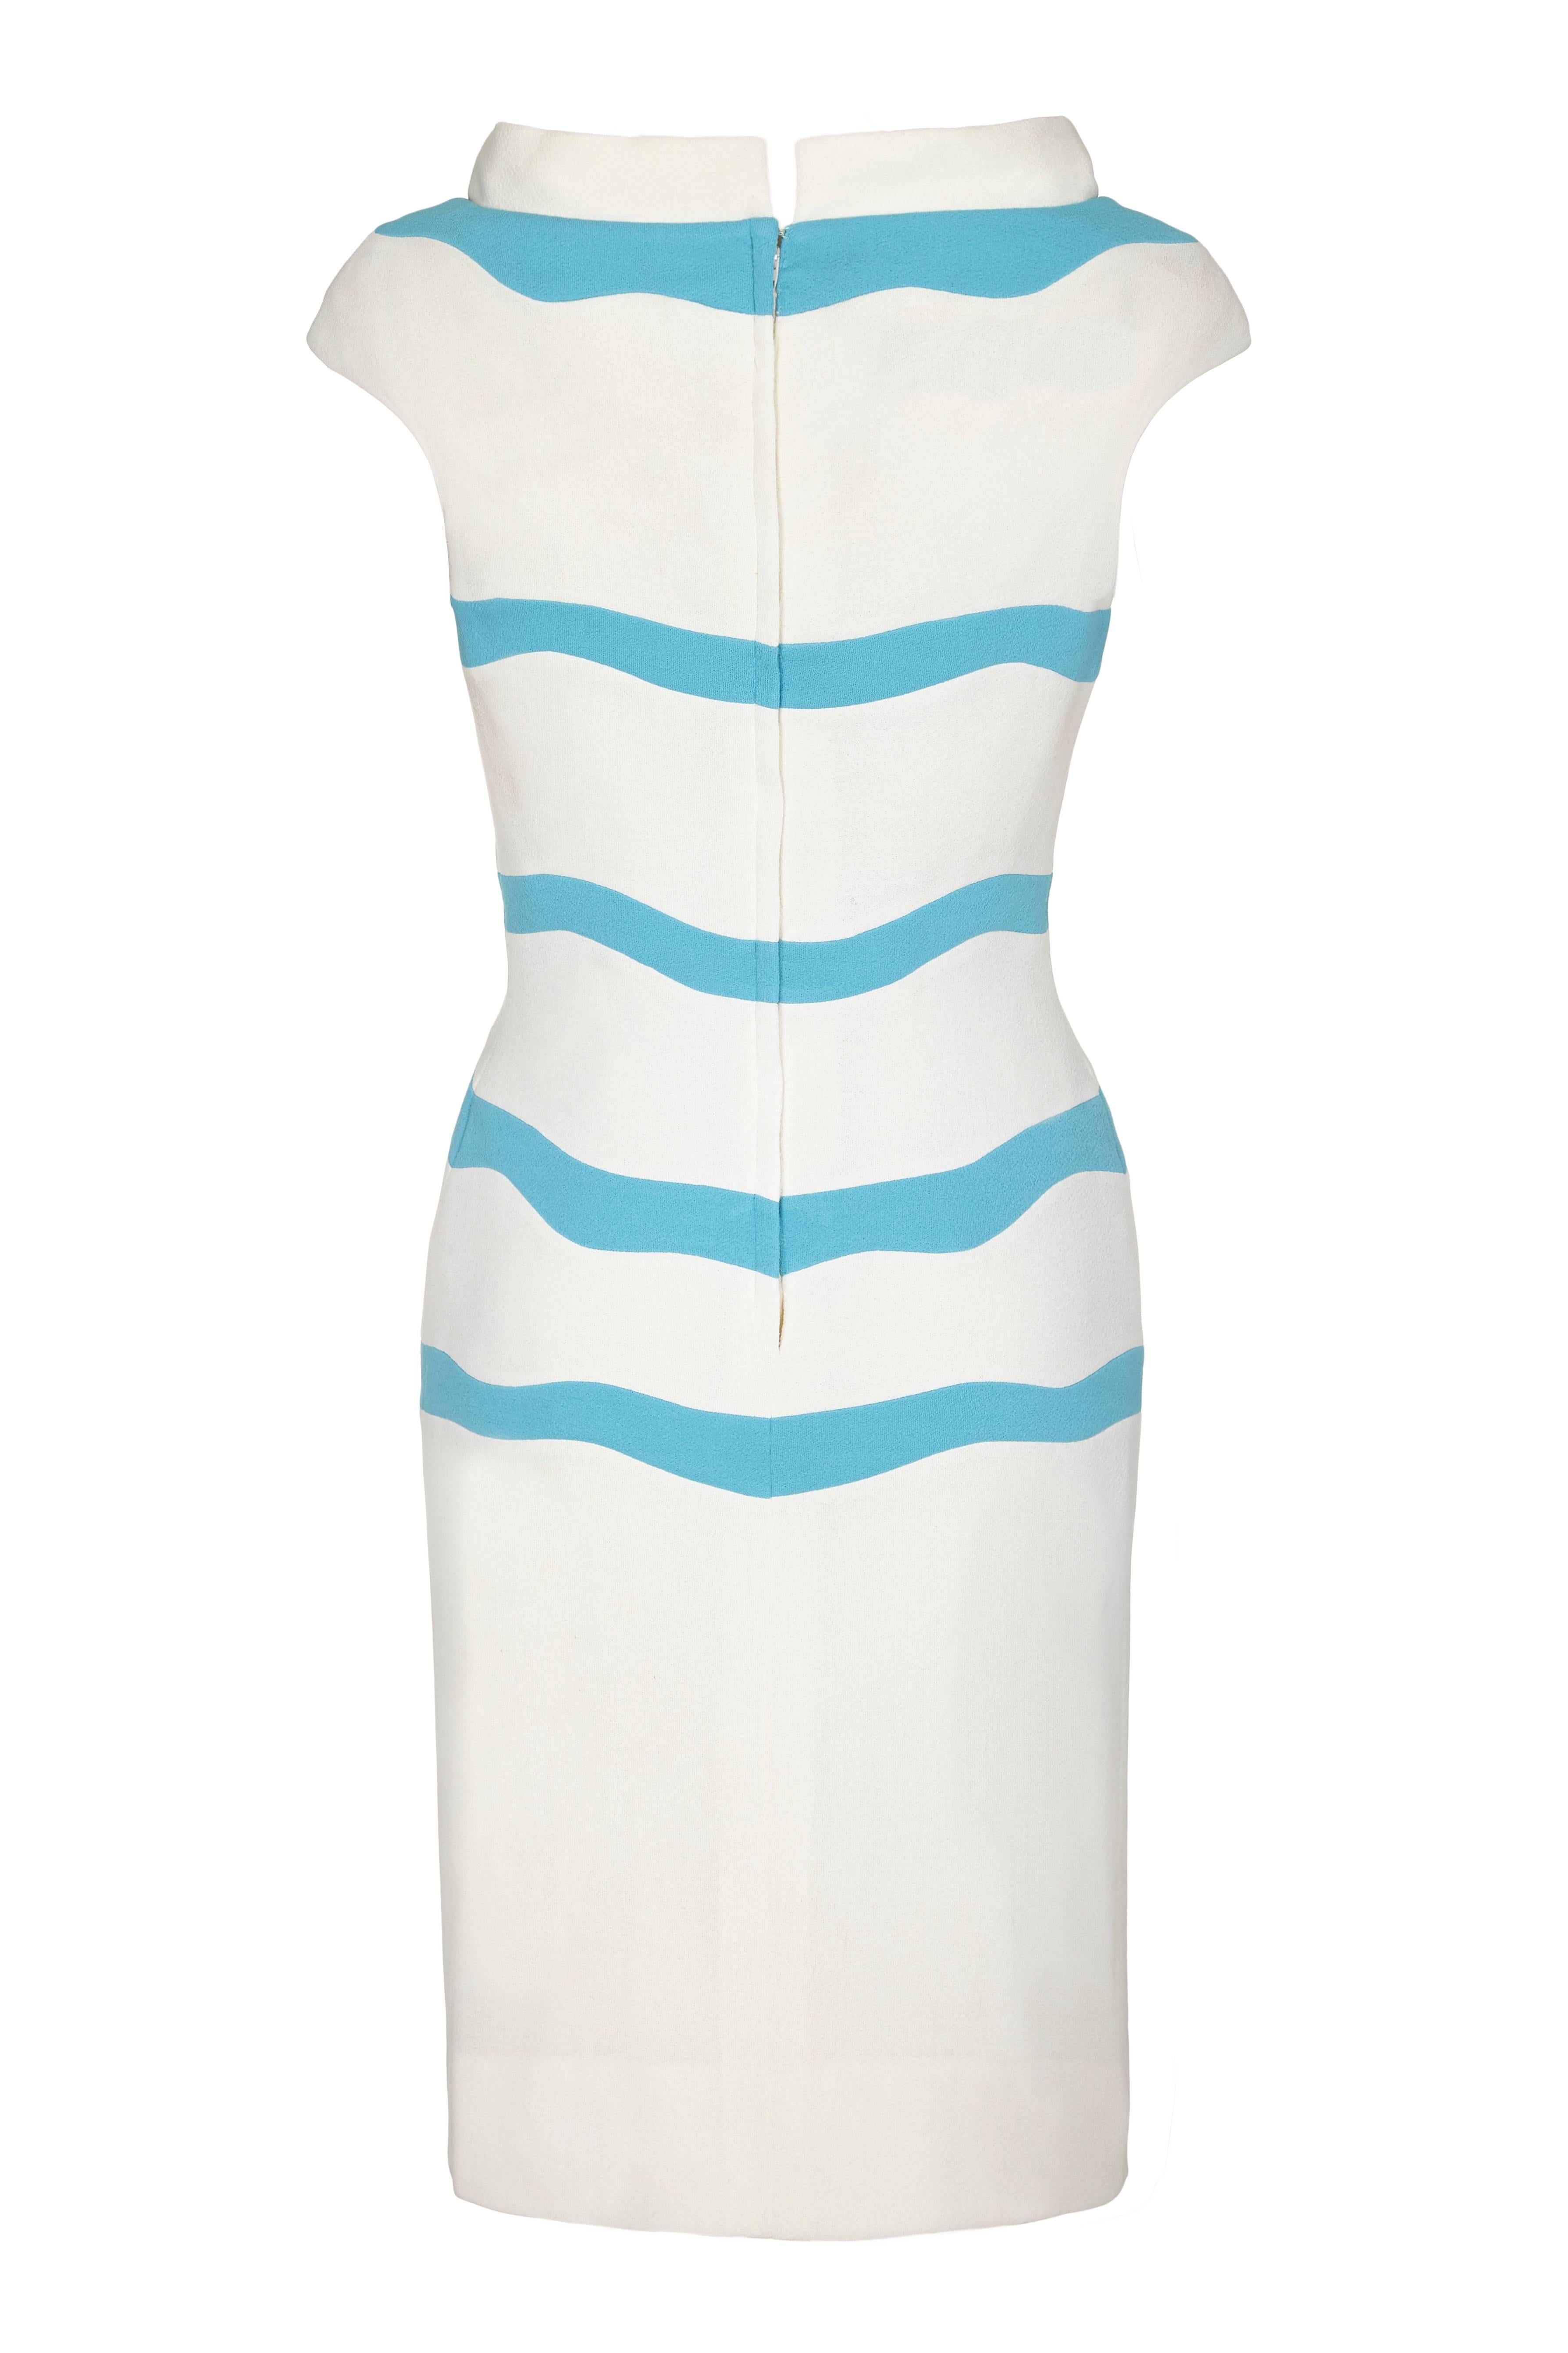 Fabulous vintage 1960s blue and white striped dress by American designer Sydney North.  This is a classic, bold 60s design and is very fitted with an open boat neckline.  It fastens at the back with a zip and is in very good condition with just a